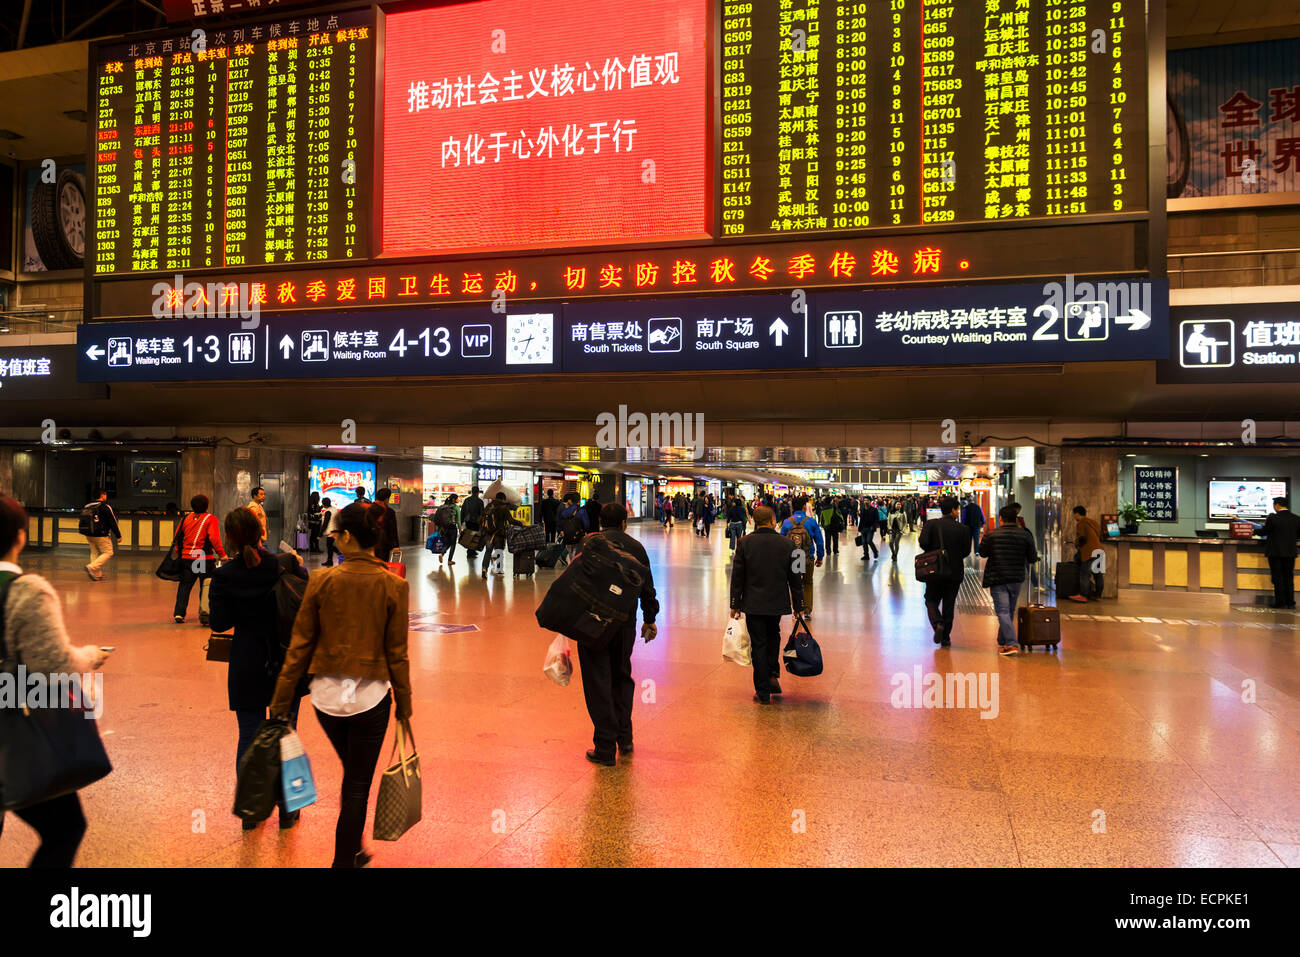 Beijing West train station interior full of people and a train departure board. Beijing, China 2014. Stock Photo